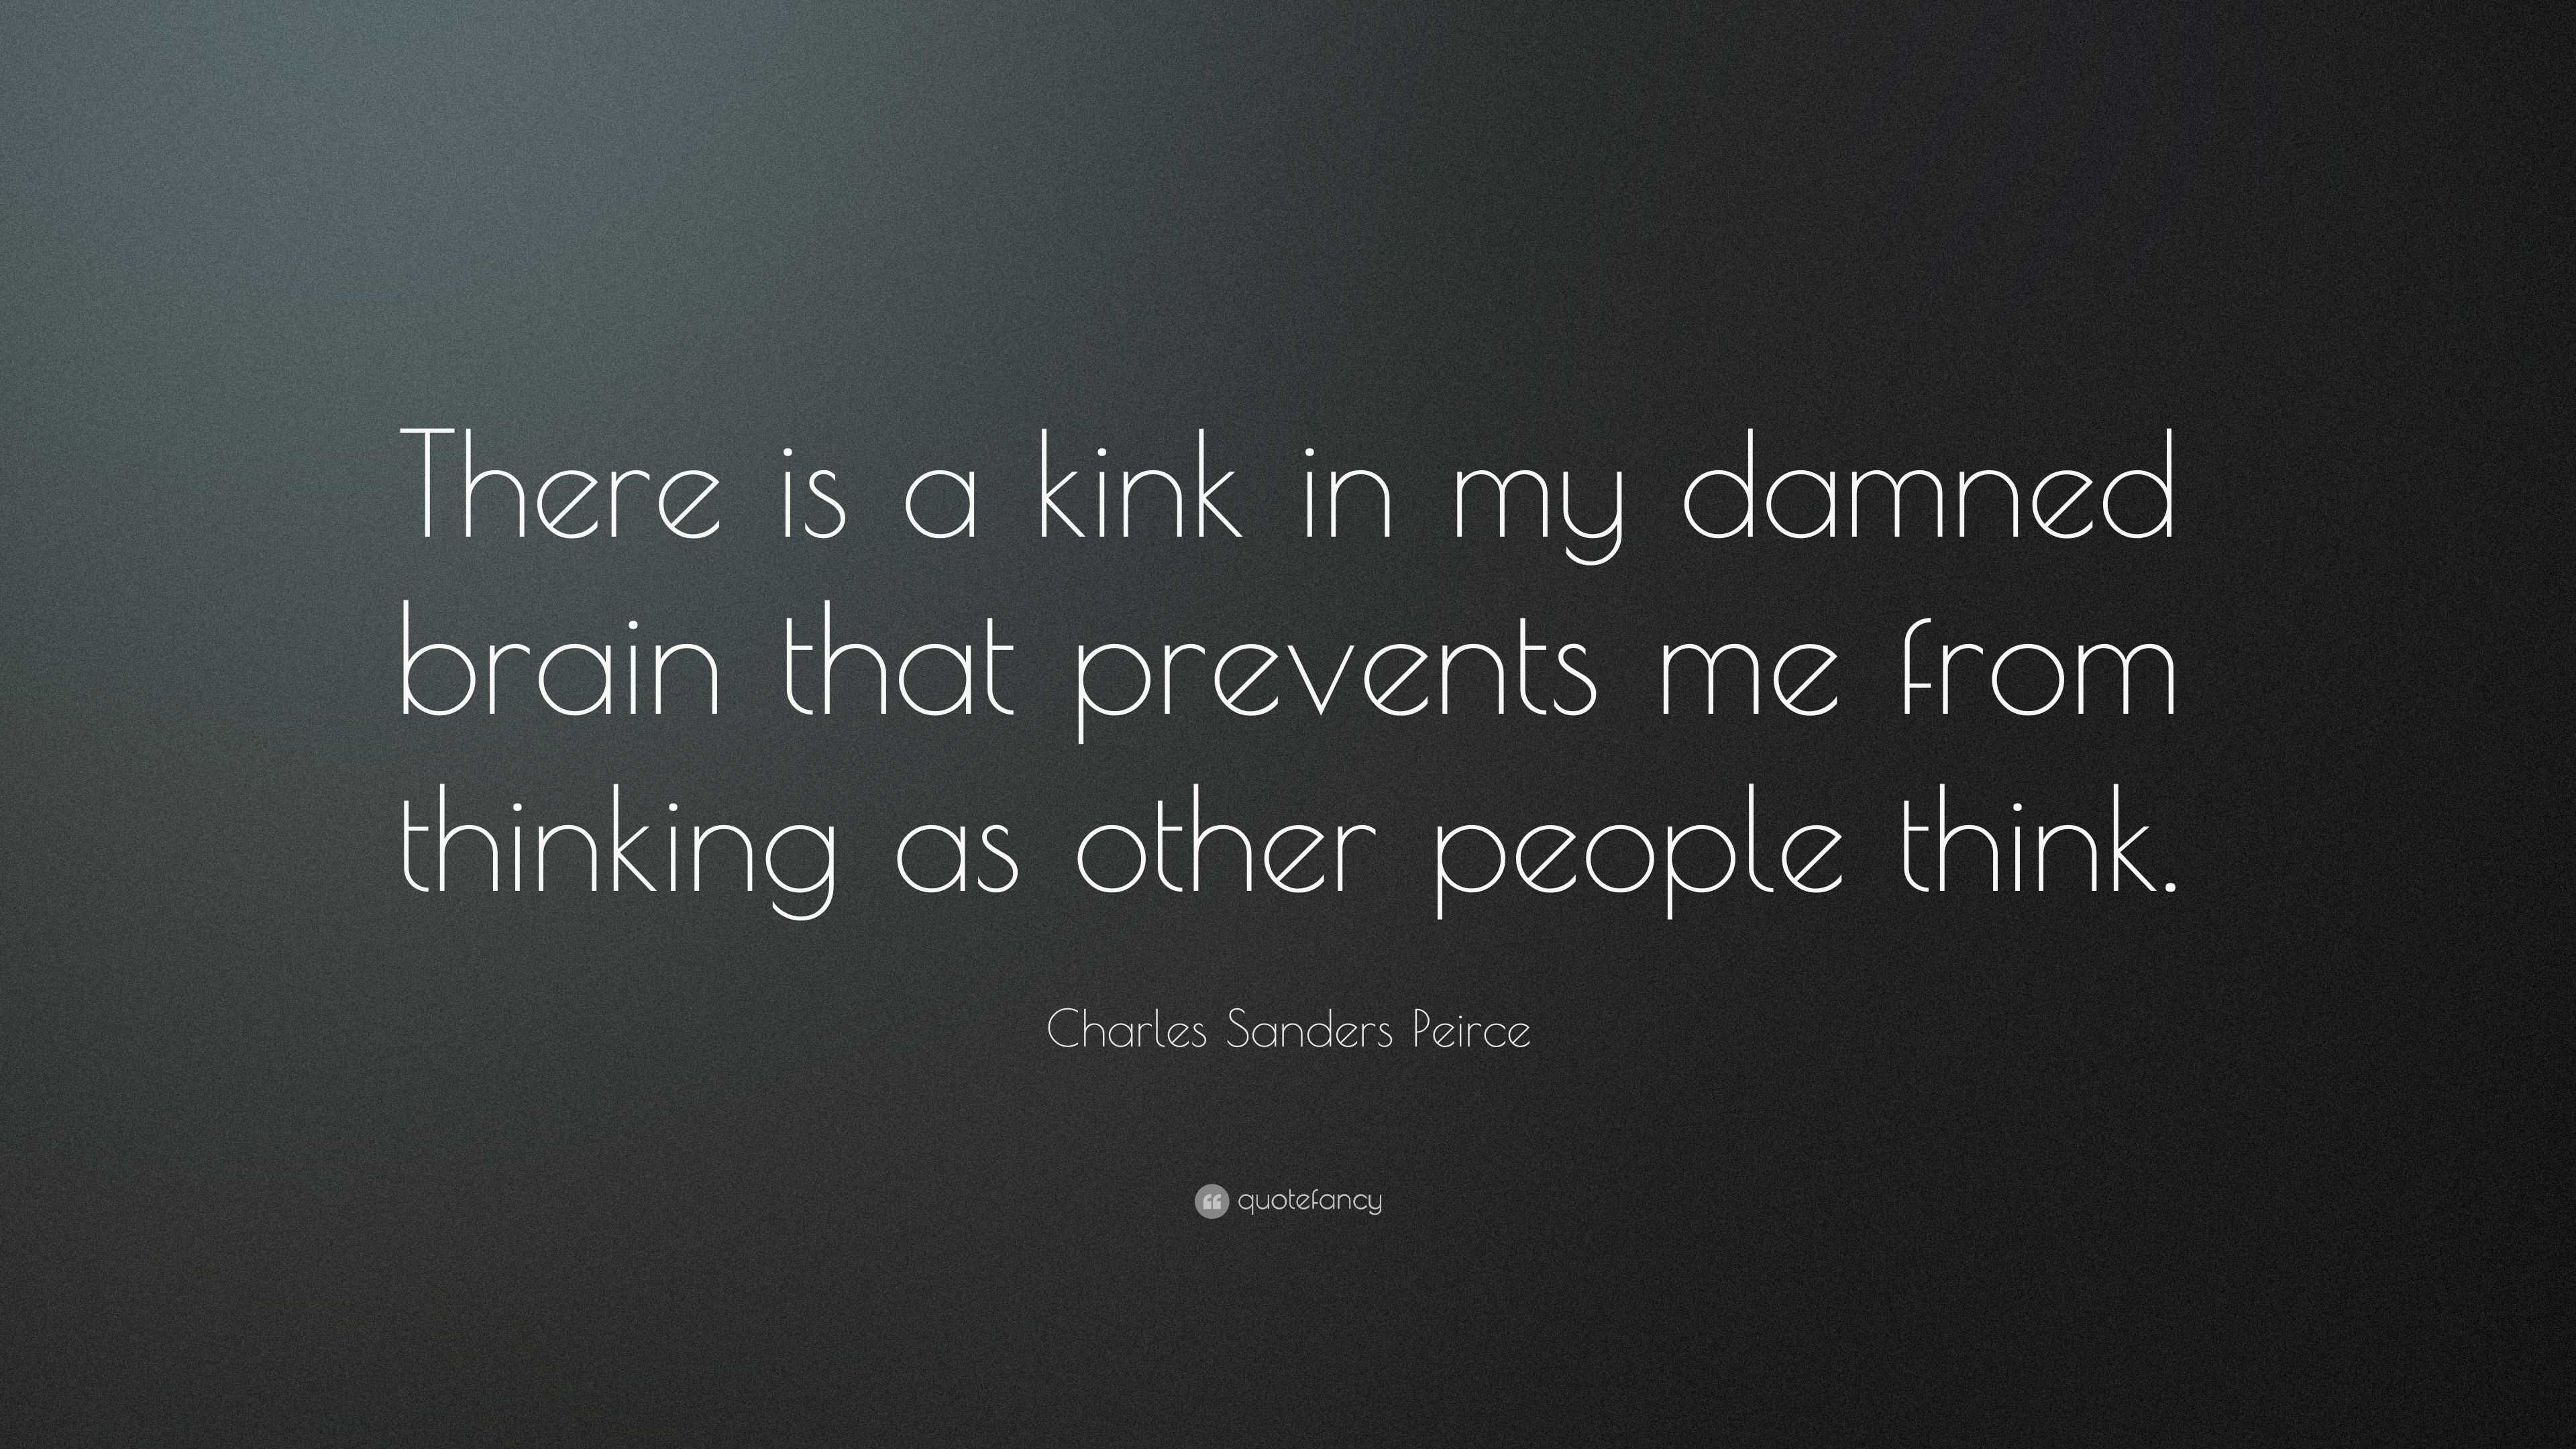 Charles Sanders Peirce Quote: “There is a kink in my damned brain that  prevents me from